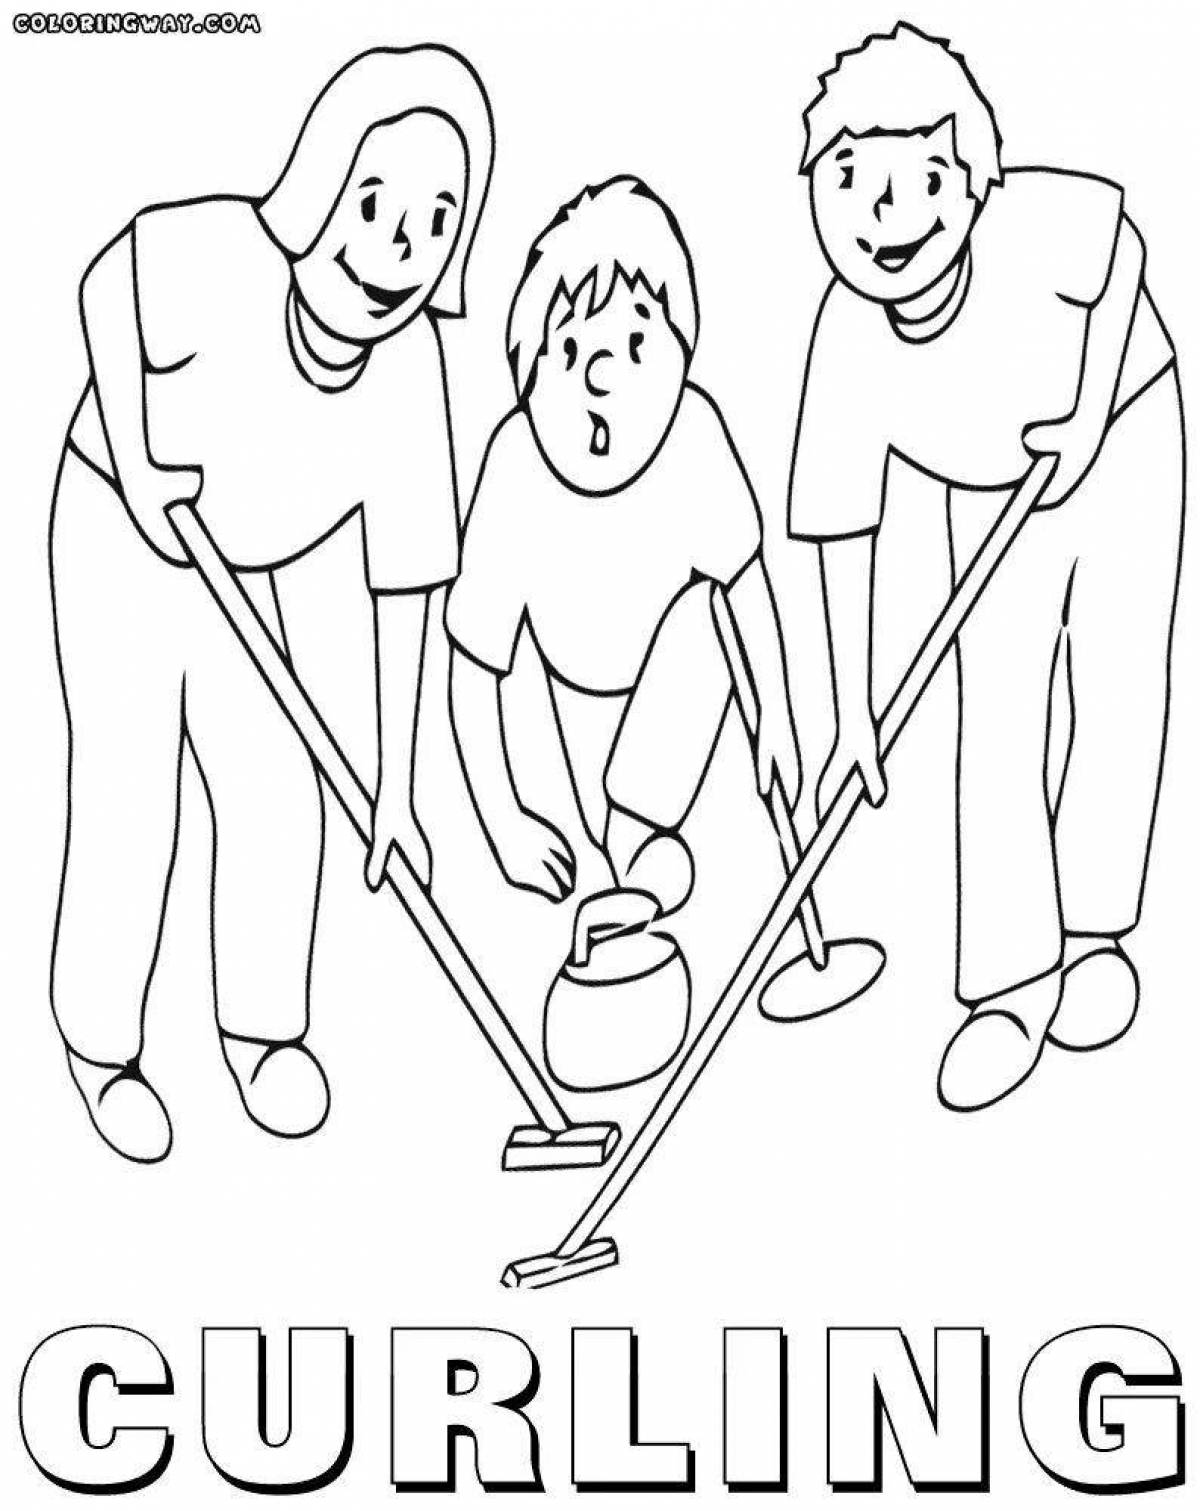 Coloring page dazzling curling